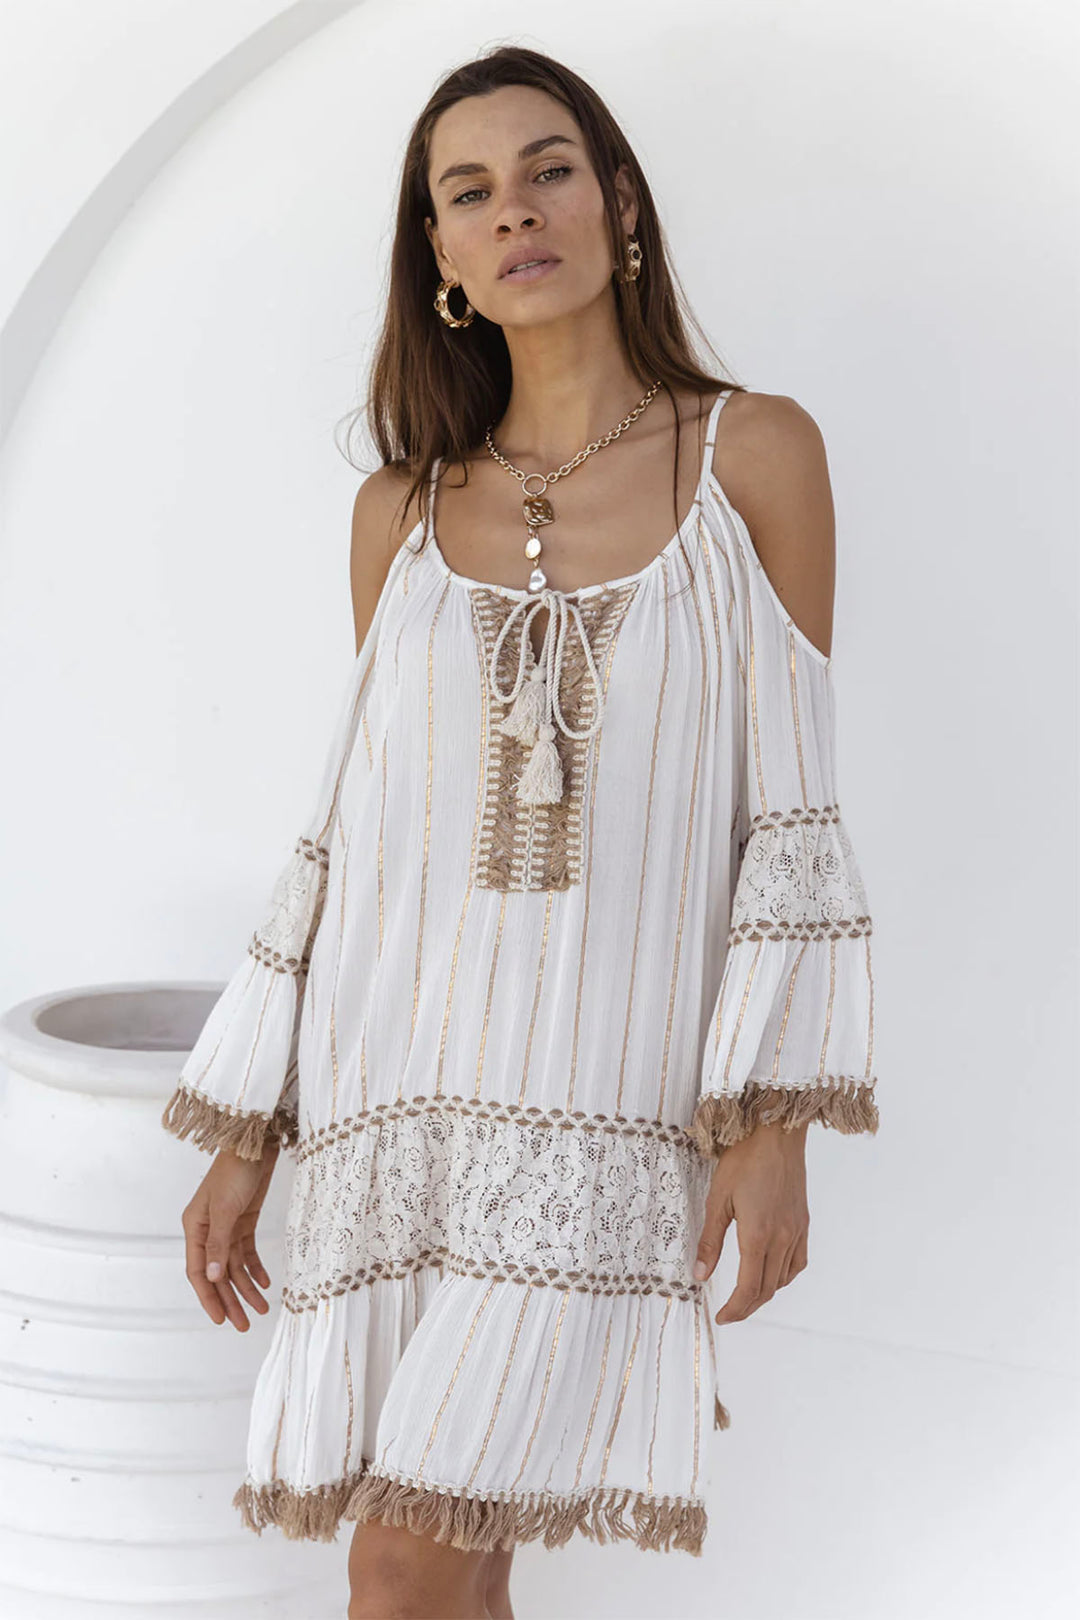 Woman wearing a boho valeria dress from Pizazz Boutique